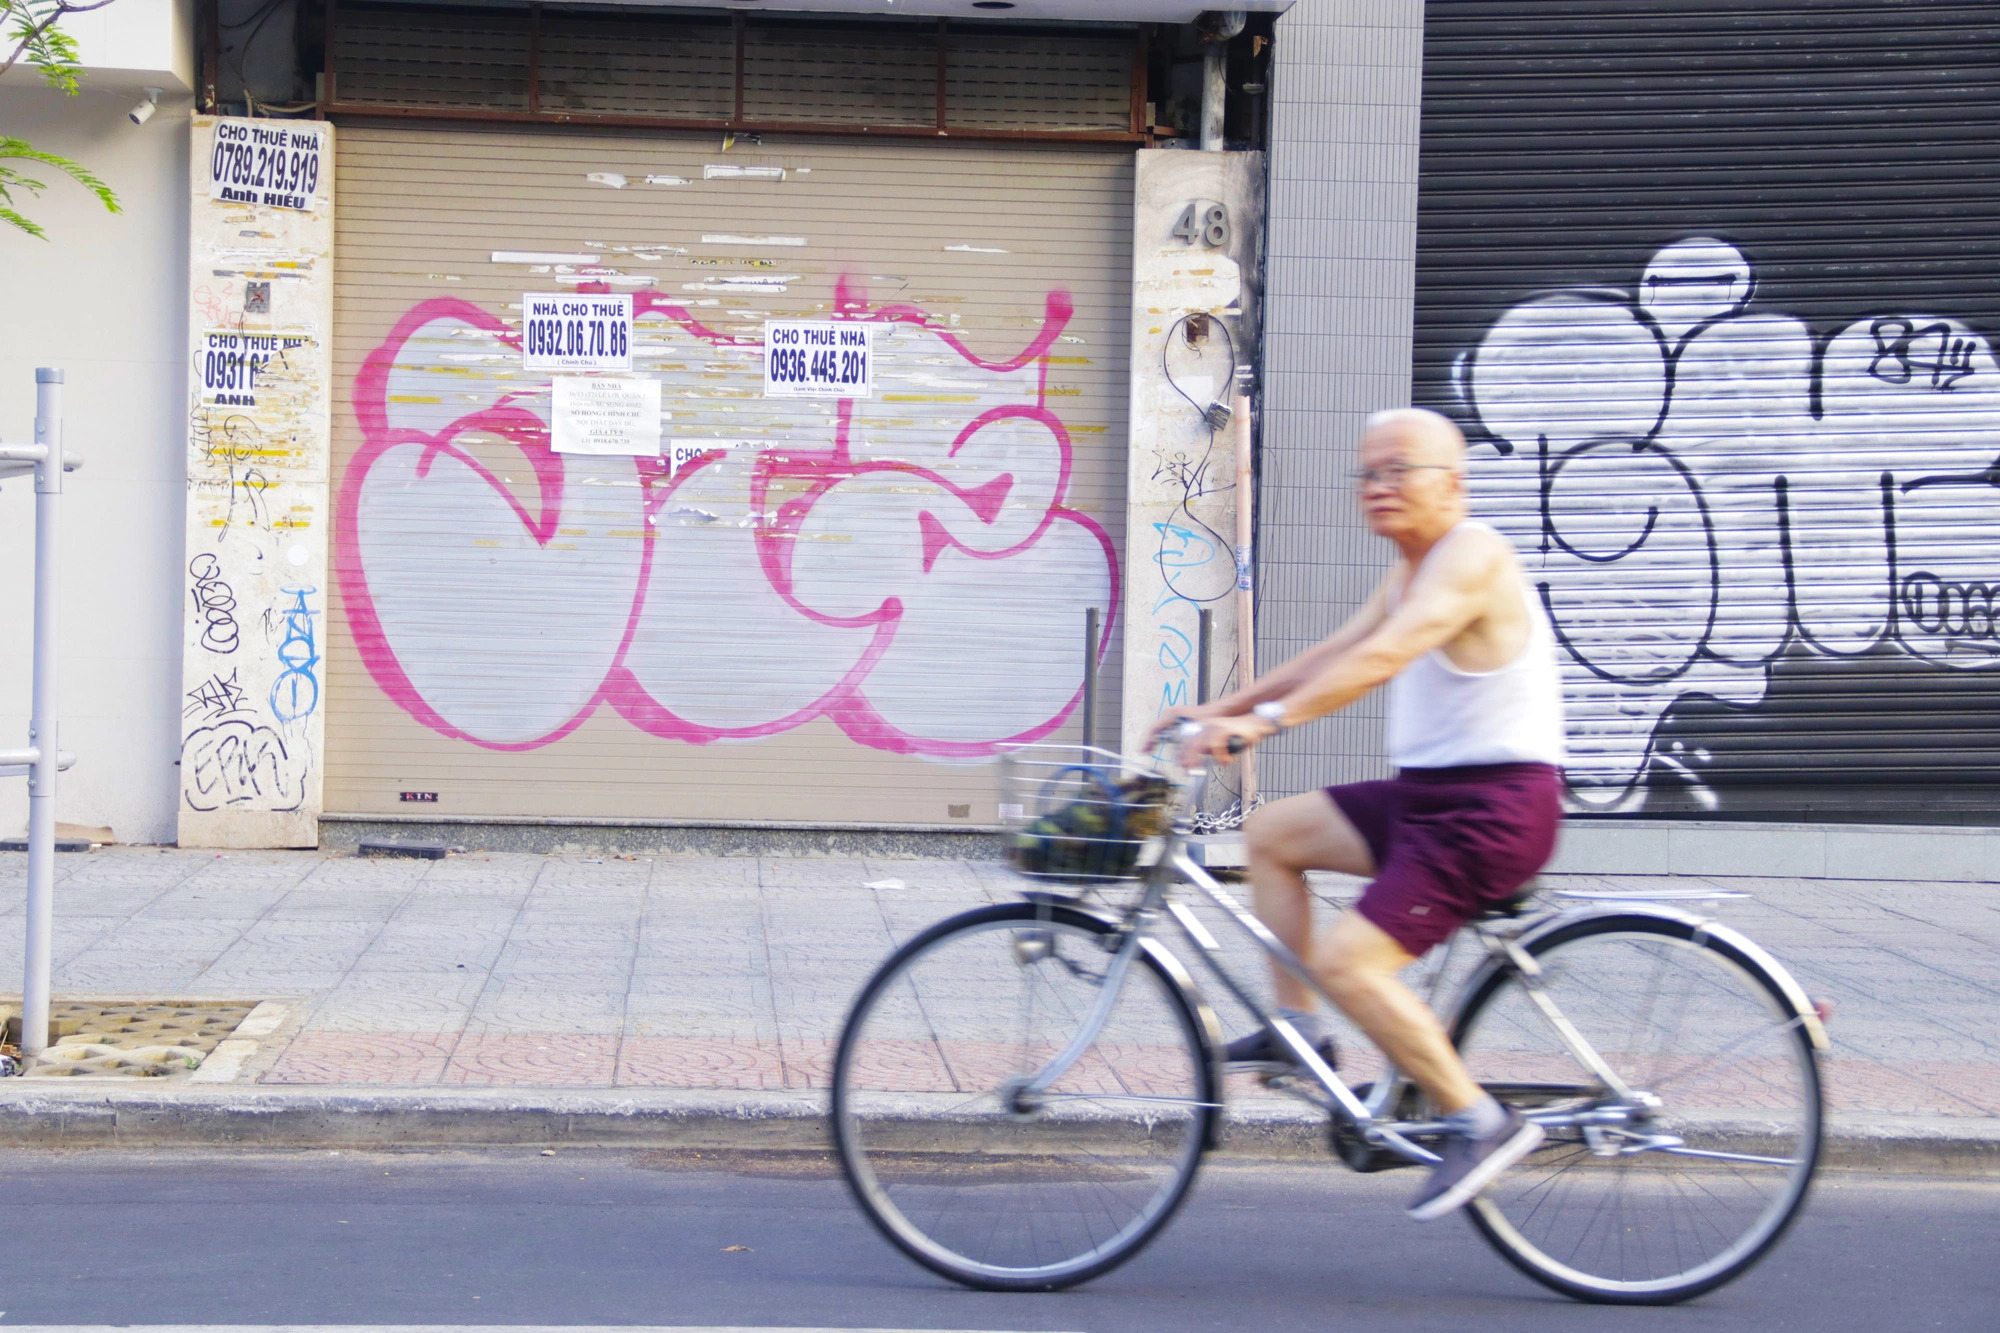 Graffiti of various colors and shapes are rampant along Le Loi Street. Photo: Tien Quoc / Tuoi Tre